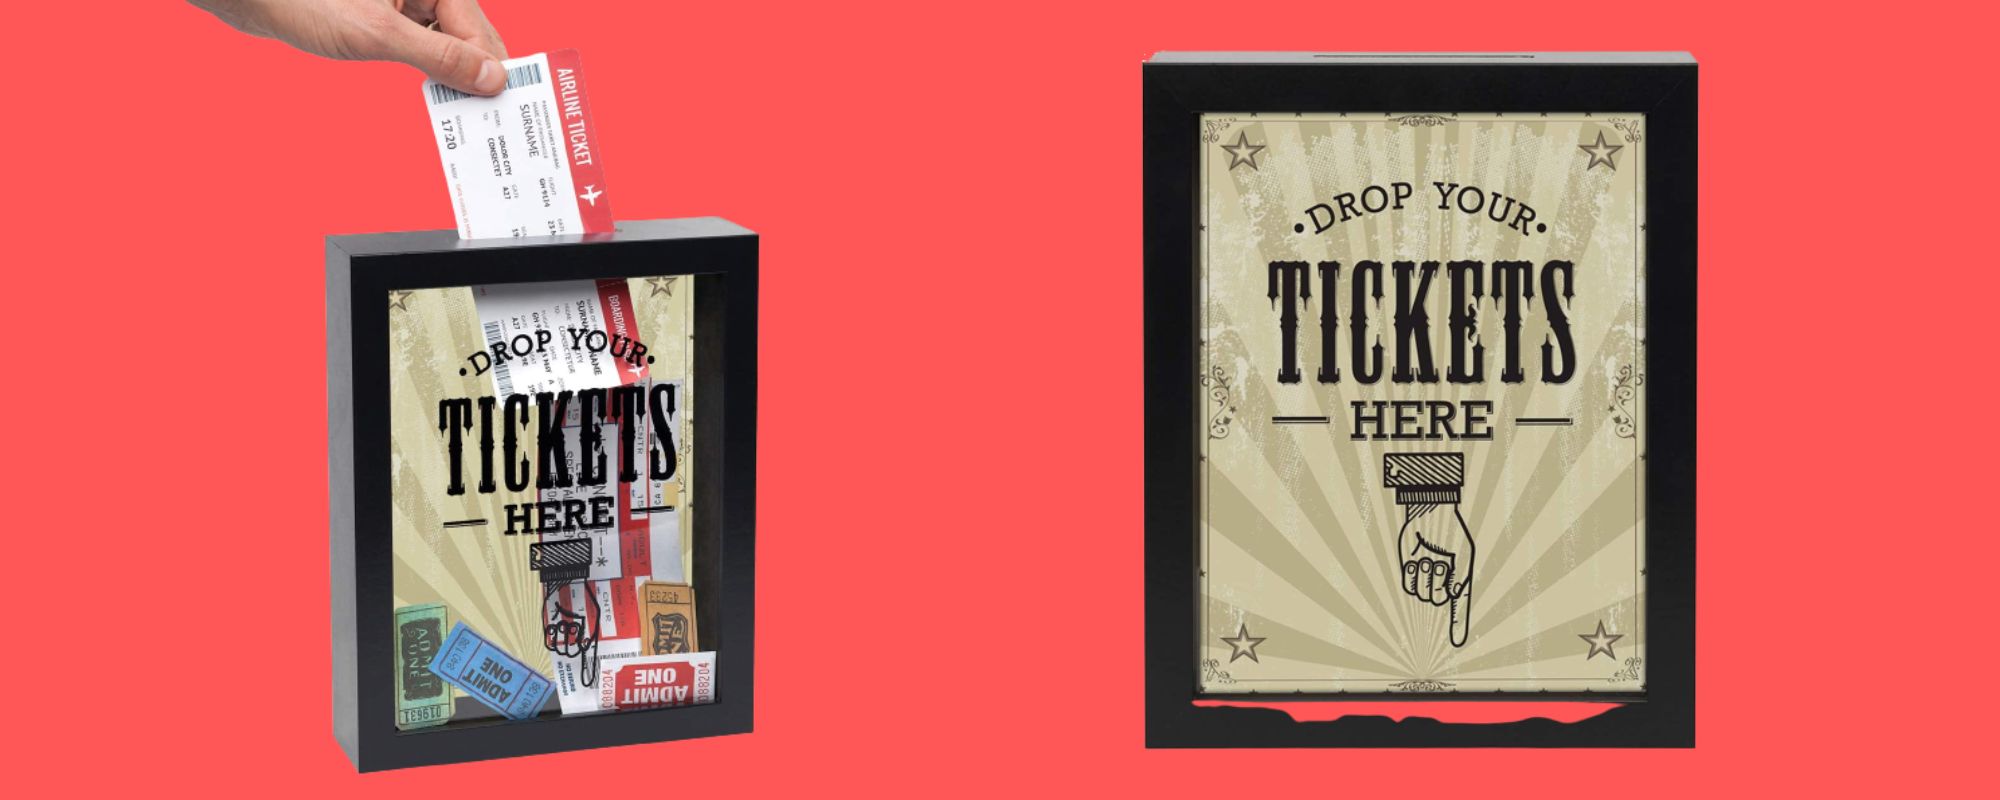 This $32 Ticket Frame is a Cool Gift for Concert Ticket Hoarders (Like Us)